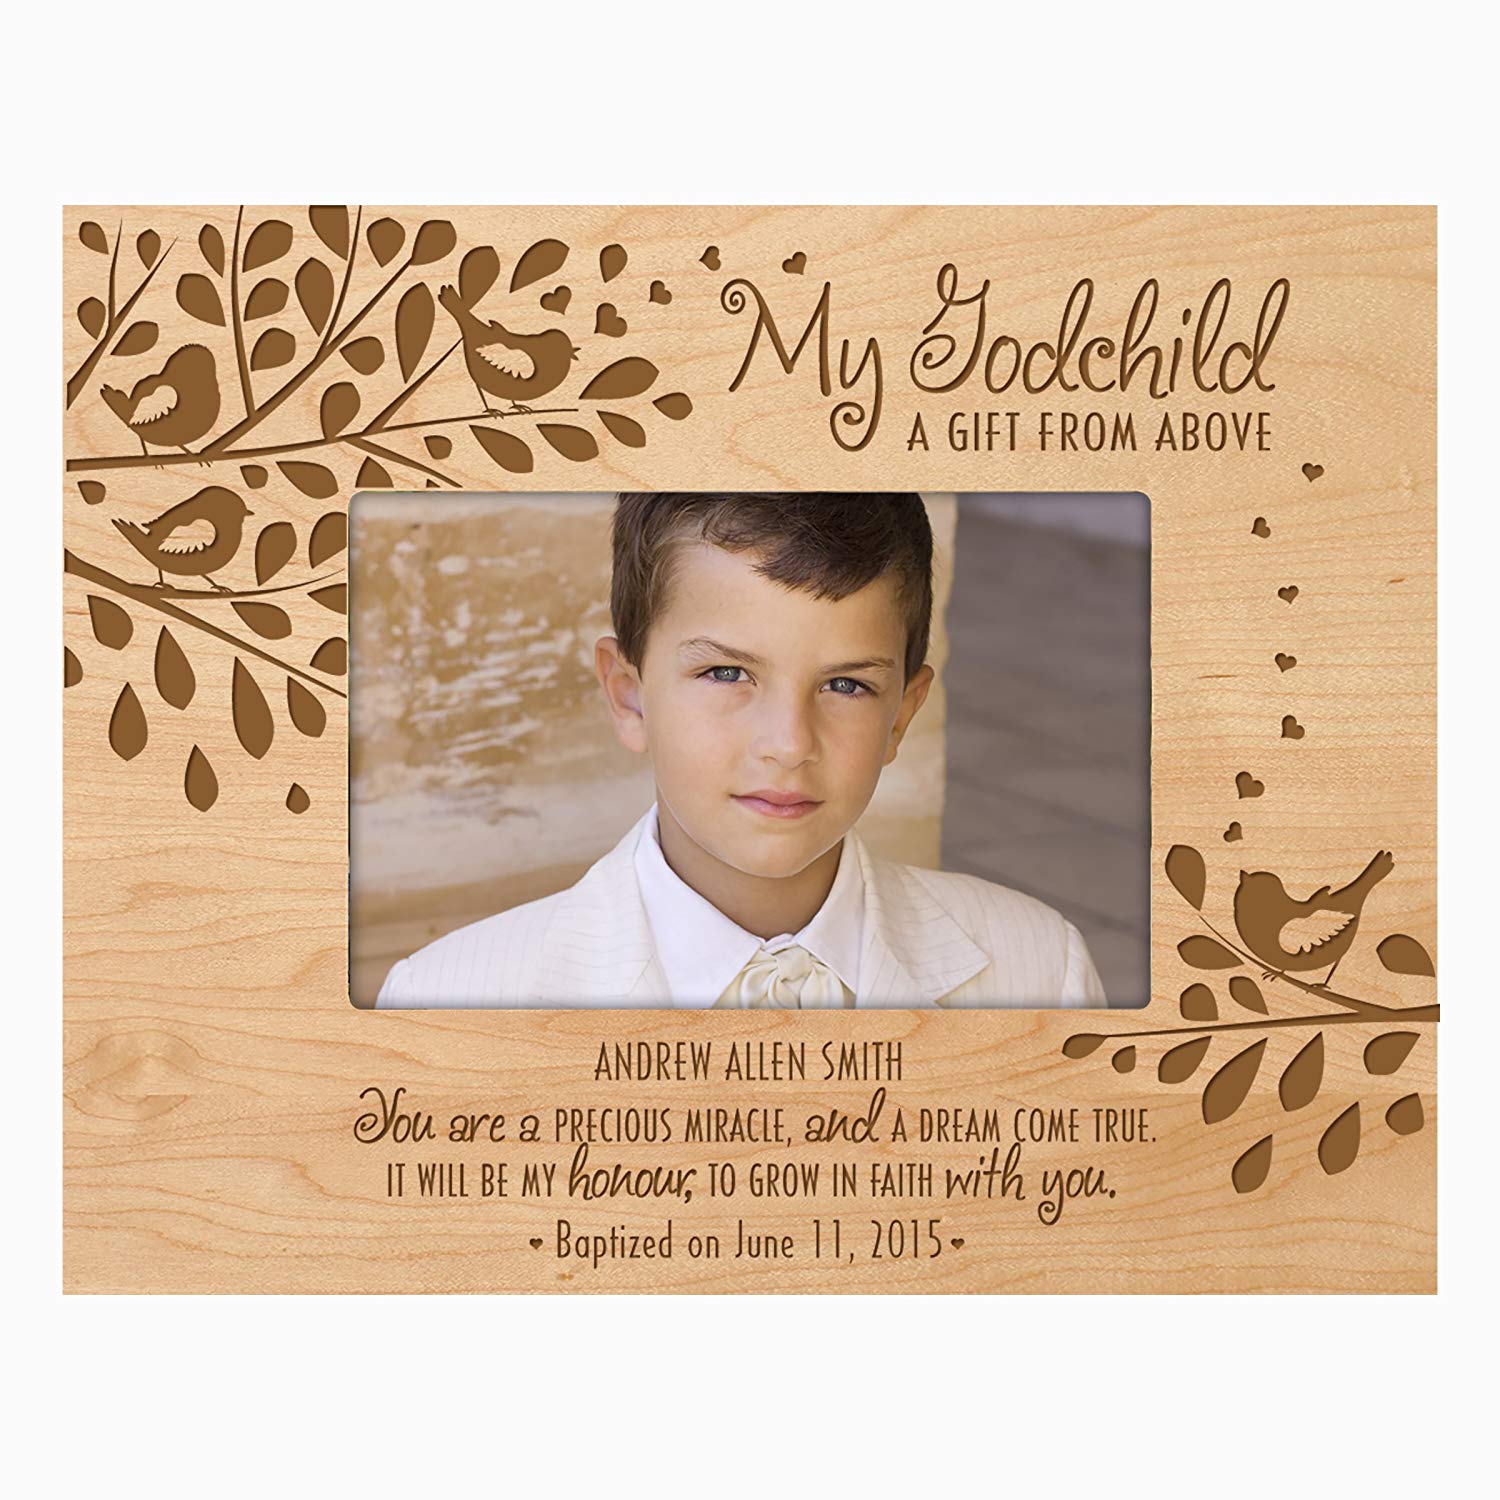 Personalized Godparent Picture Frame Gift "Precious Miracle" - LifeSong Milestones